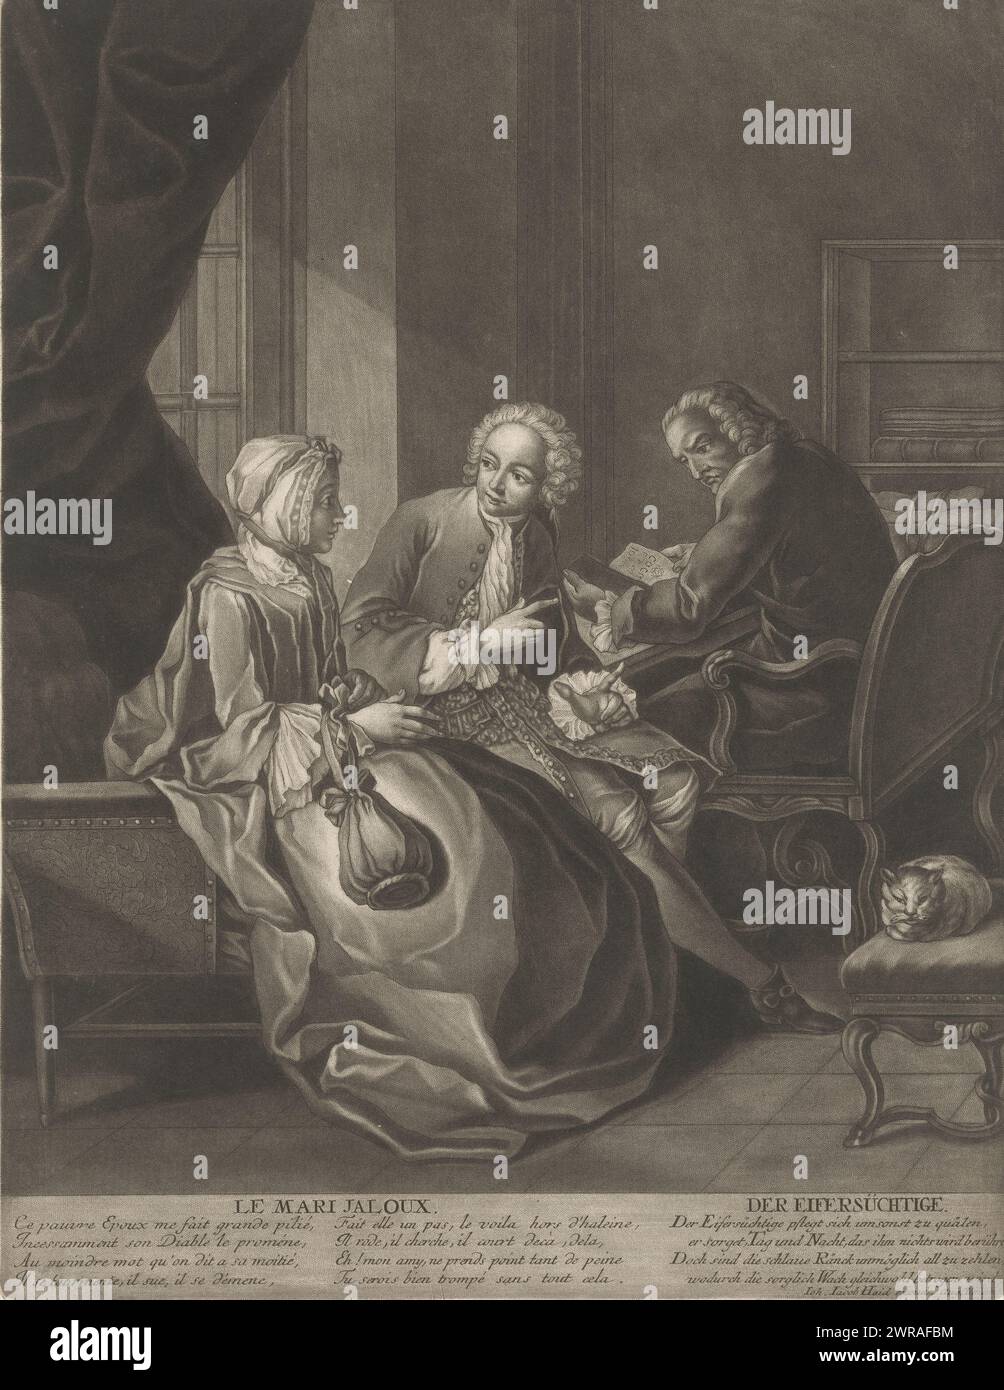 Jealous husband, Le mari jaloux / Der Eifersüchtige (title on object), With caption in German and French., print maker: Johann Jacob Haid, (possibly), after painting by: Etienne Jeaurat, publisher: Johann Jacob Haid, Augsburg, 1714 - 1767, paper, etching, height 410 mm × width 317 mm, print Stock Photo